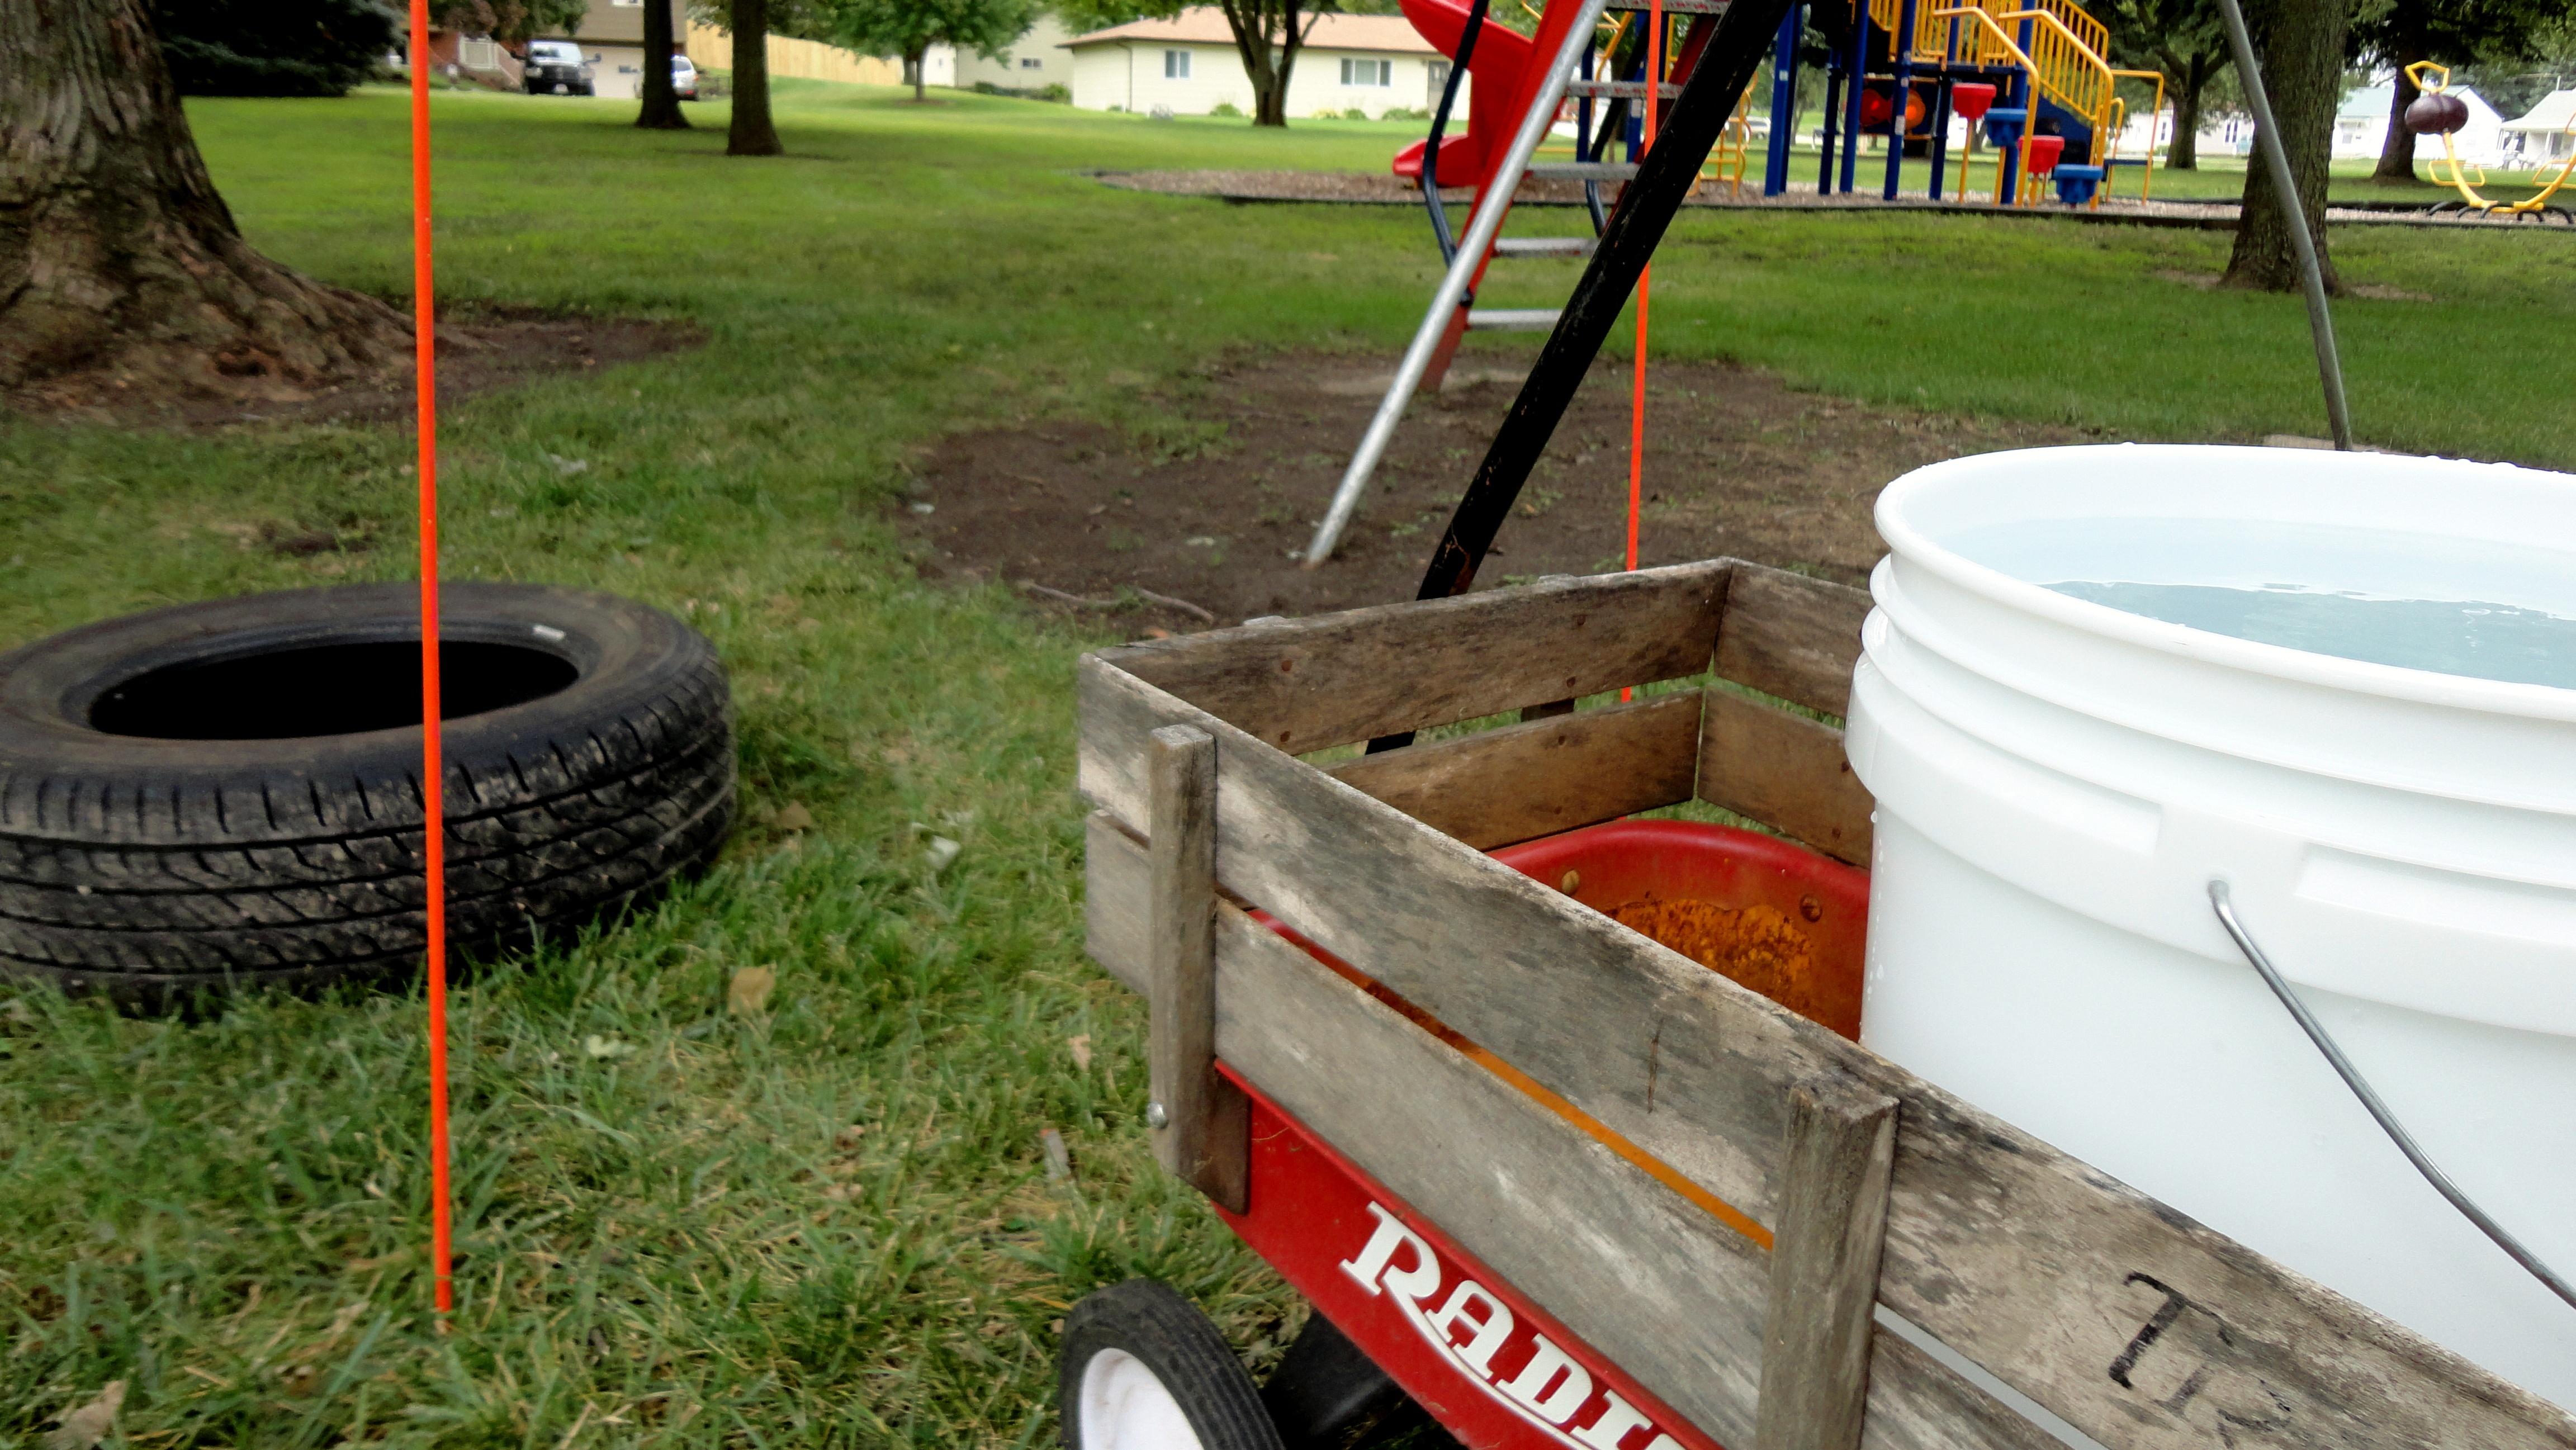 A child's red wagon is shown in a city park with a white five gallon buck in it.  